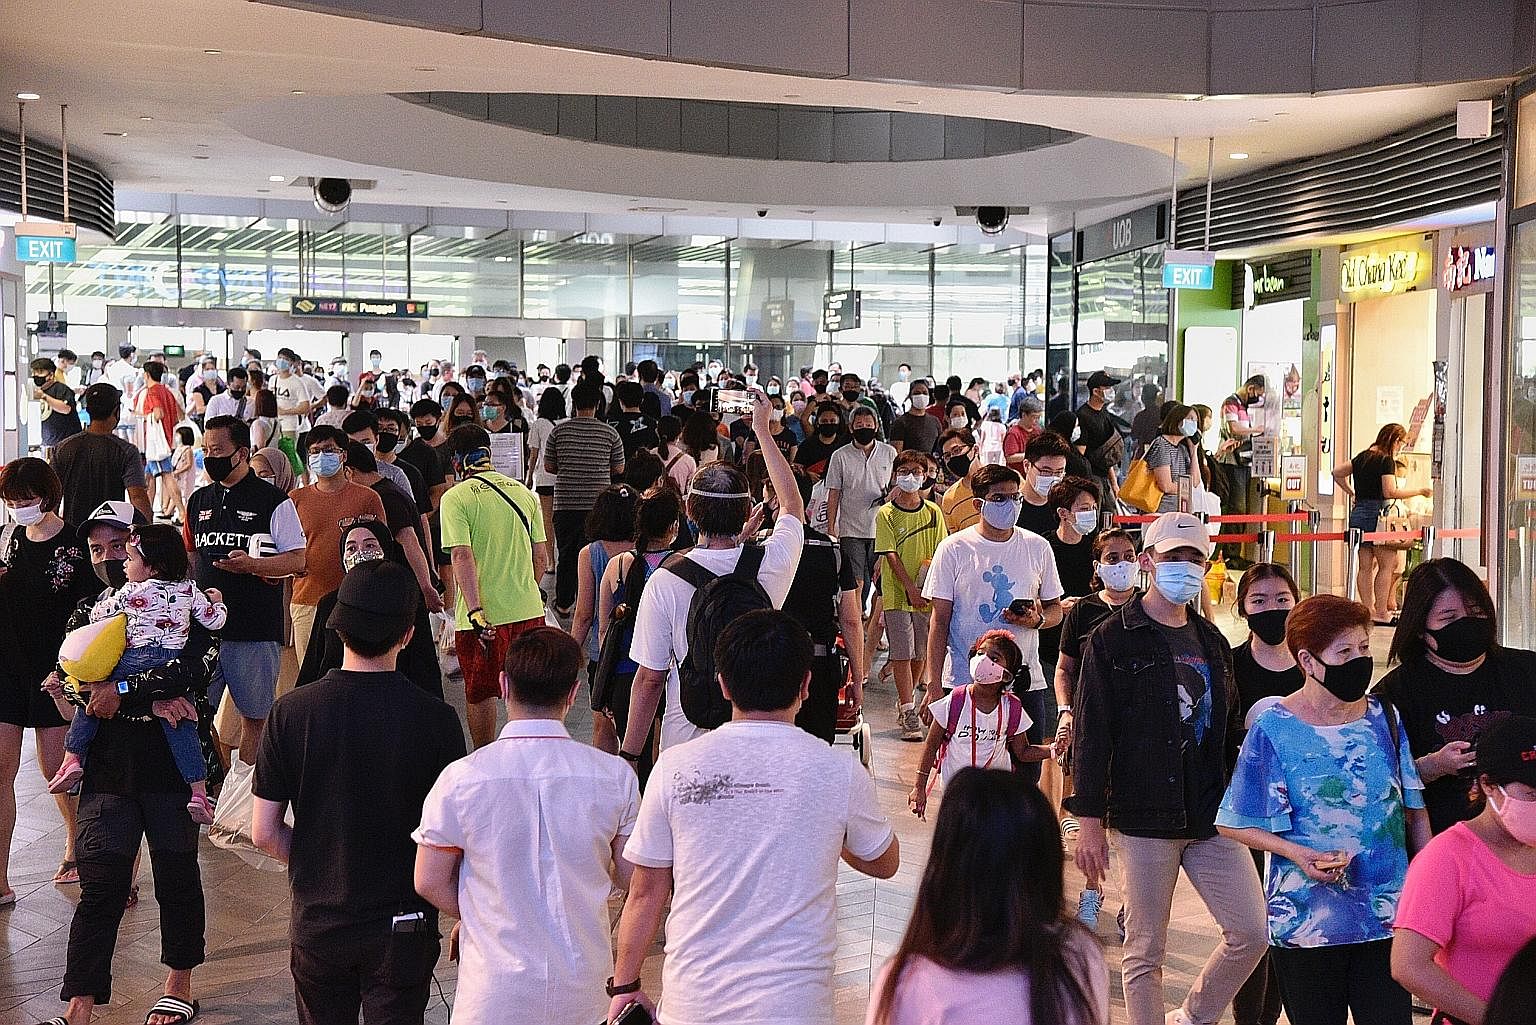 Shoppers at Waterway Point in Punggol last weekend, after Singapore moved into phase two of its reopening in the post-circuit breaker period. The Covid-19 pandemic shows no signs of slowing down across the world, with the number of cases approaching 